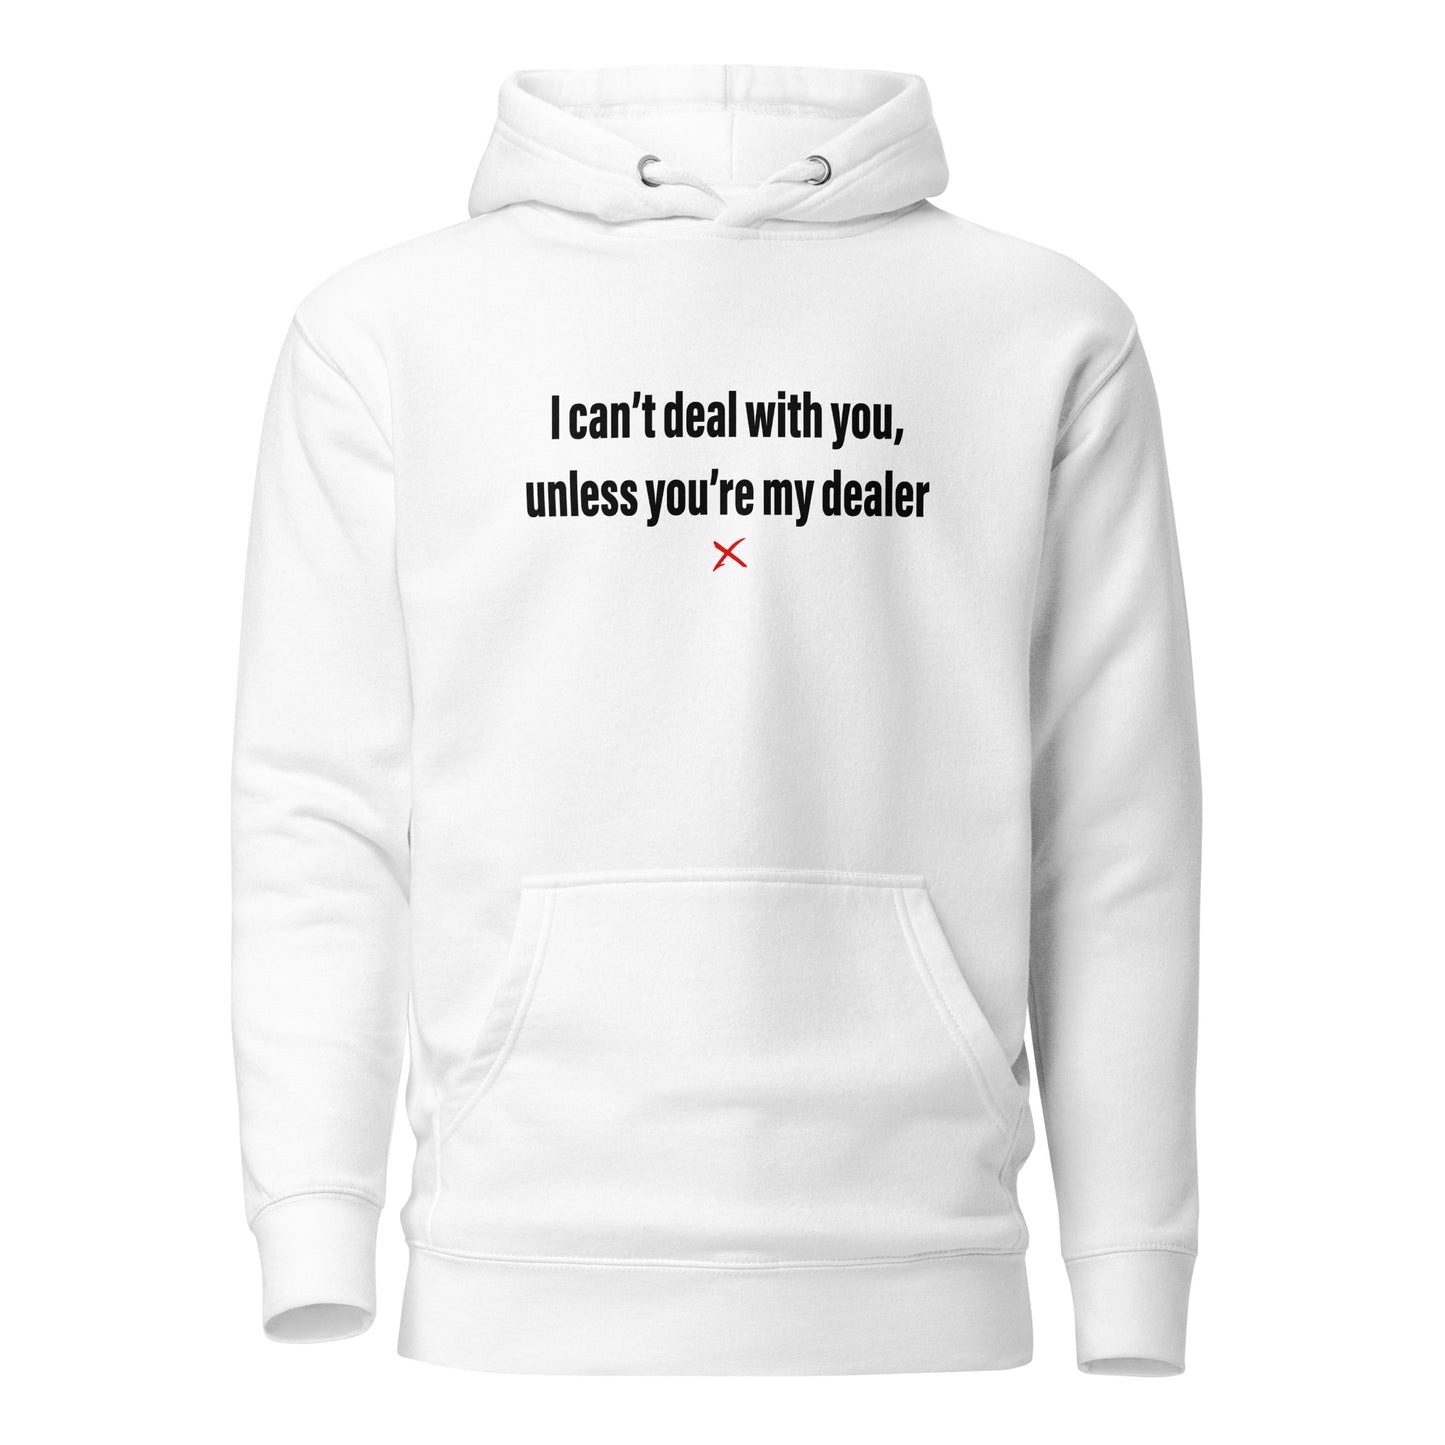 I can't deal with you, unless you're my dealer - Hoodie